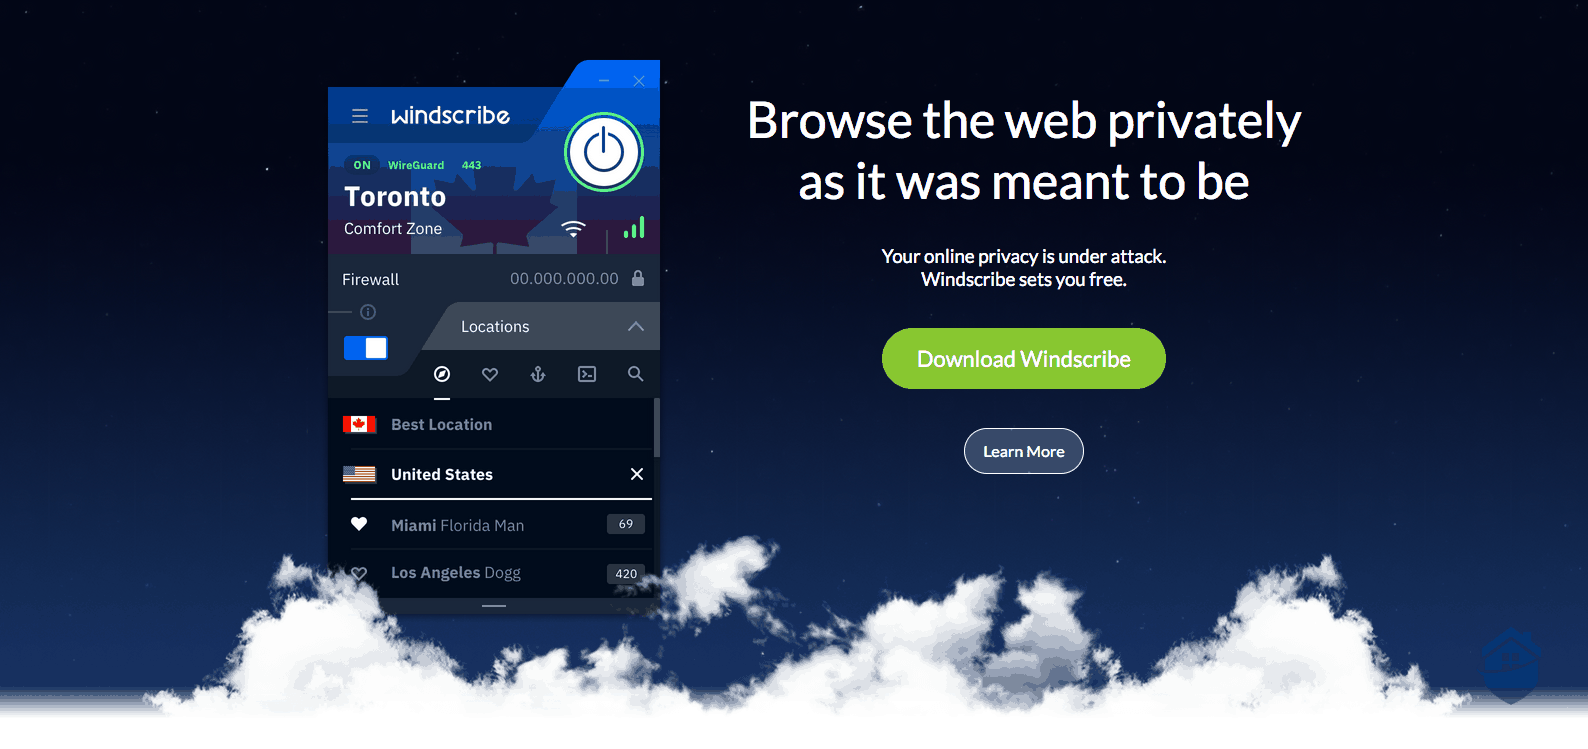 Hit that download button and you can try Windscribe for free